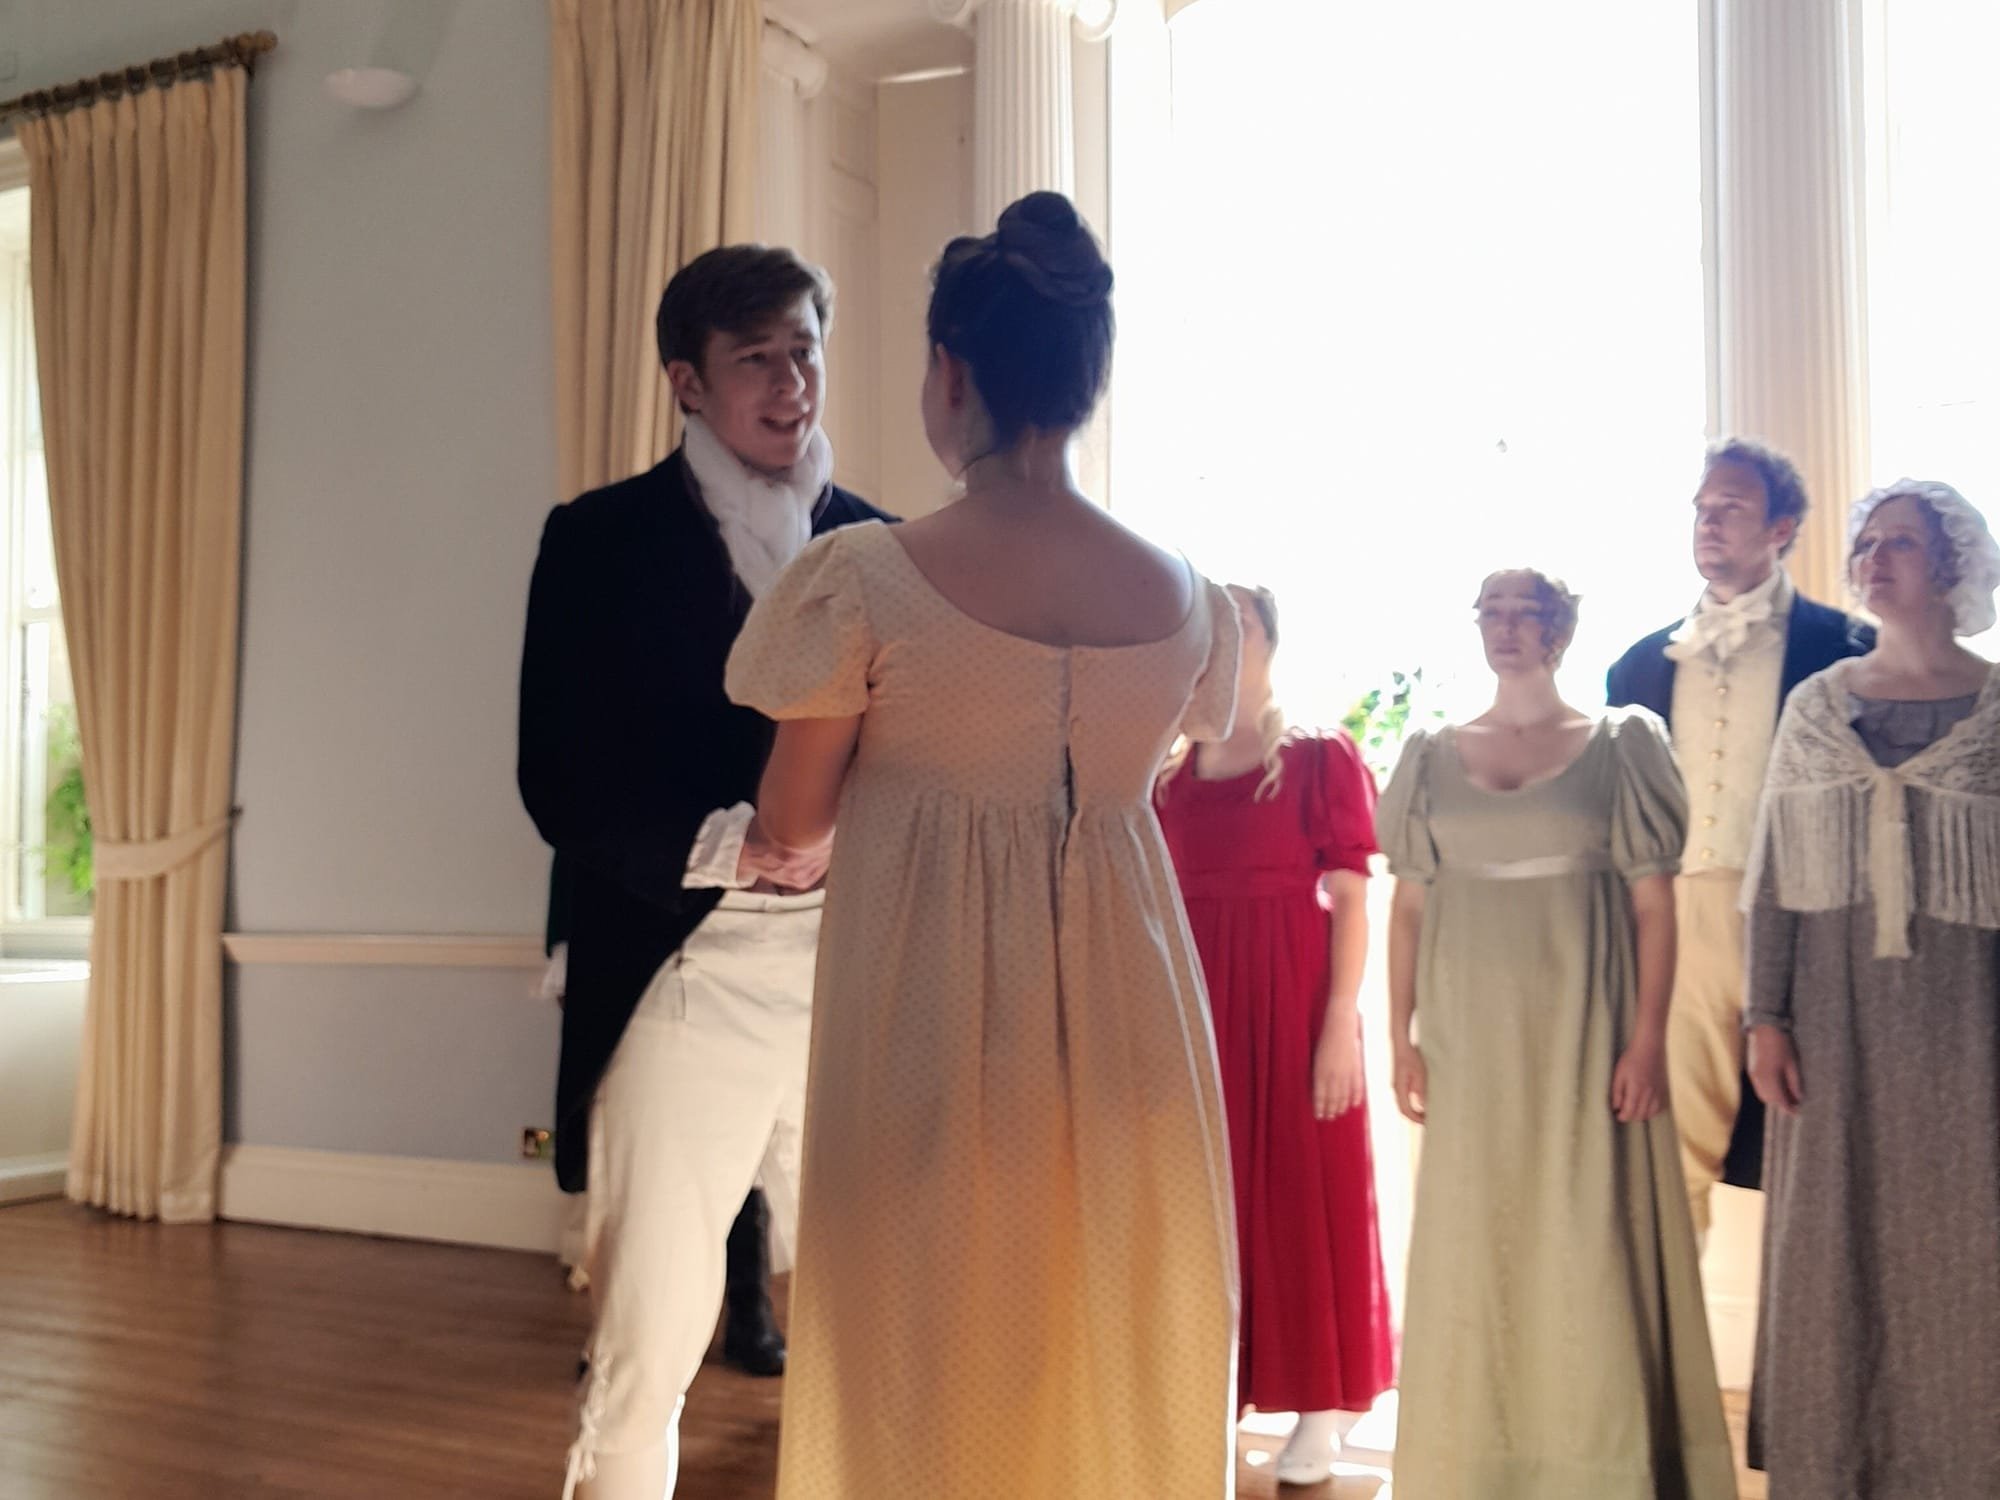 Mansfield Park at Waterperry Opera Festival